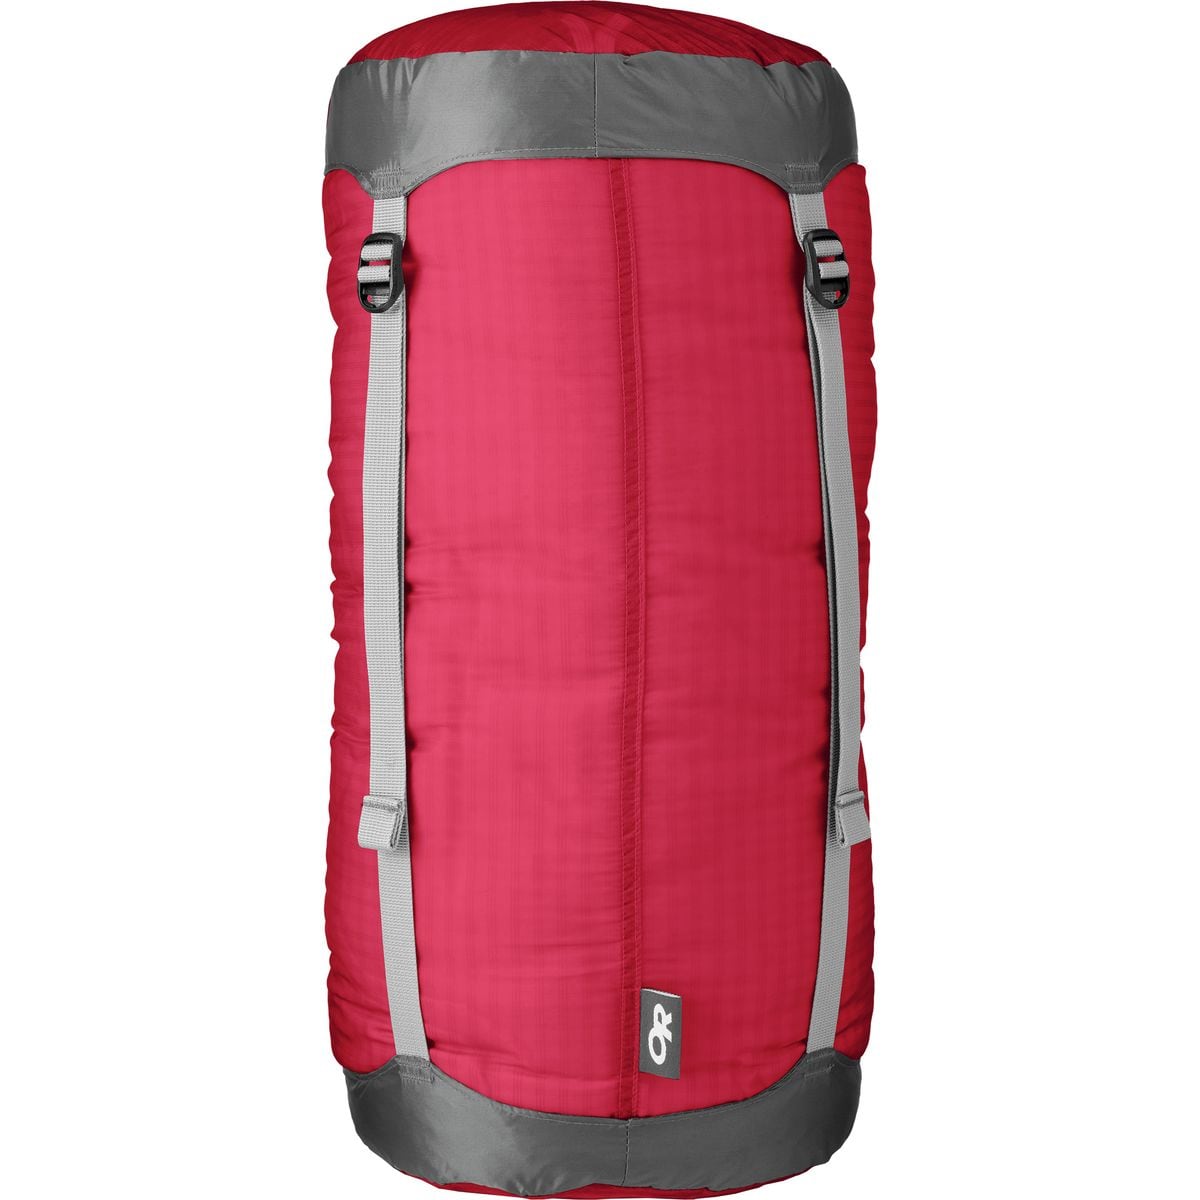 Outdoor Research UltraLight Compression Sack - Hike & Camp